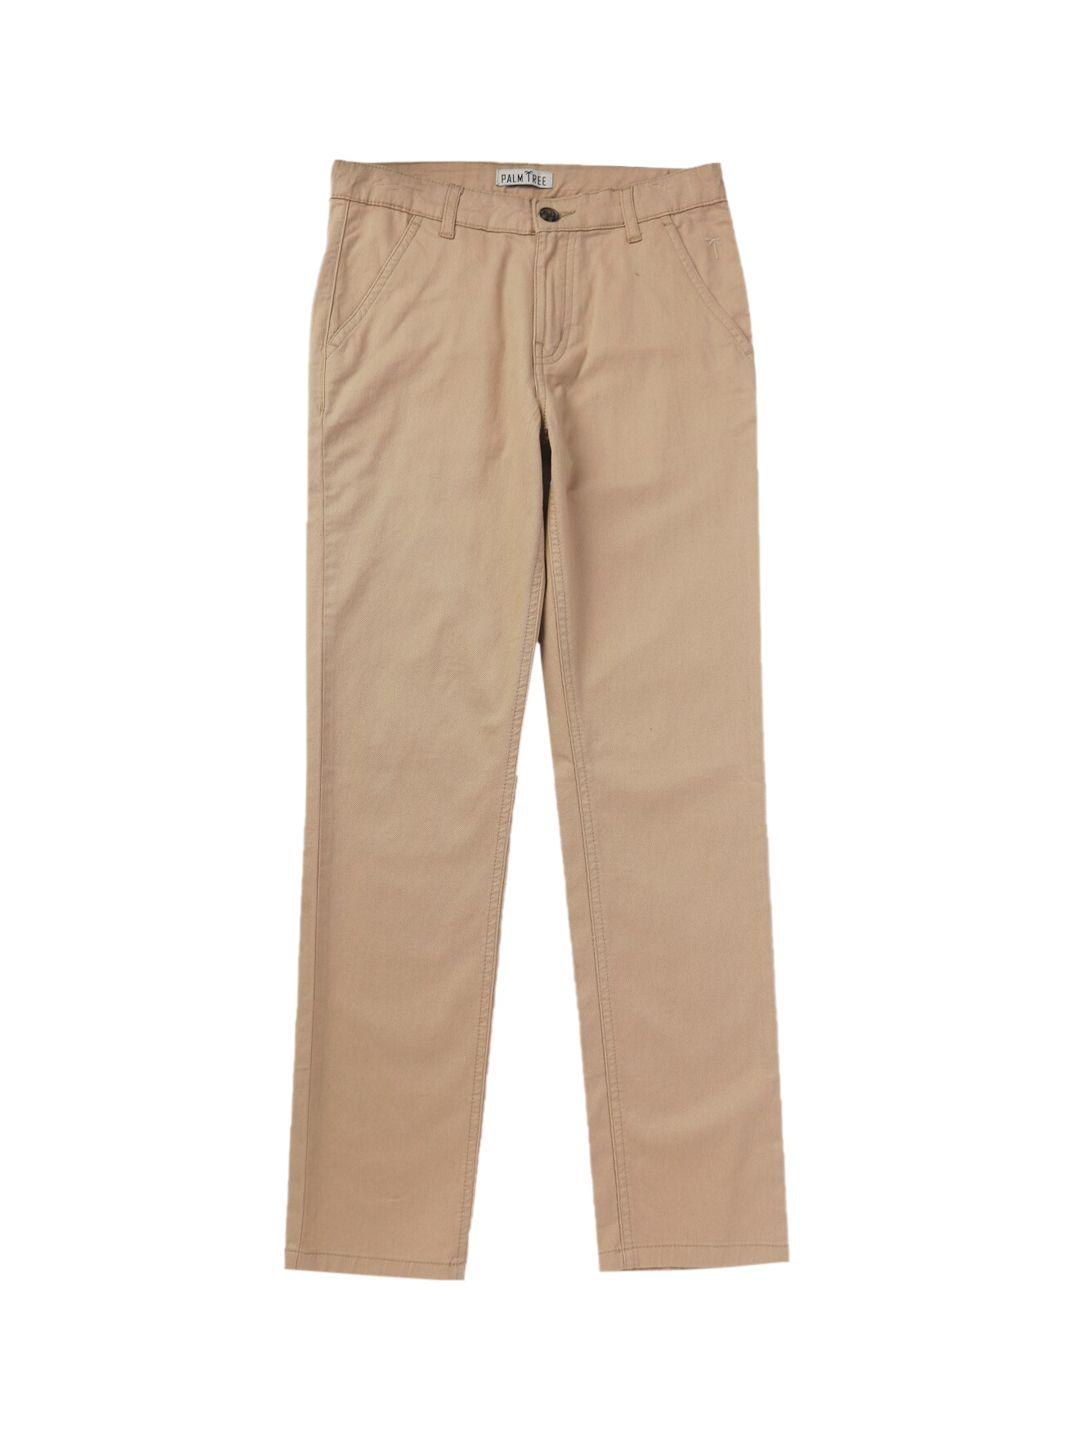 palm tree boys mid-rise cotton chinos trousers